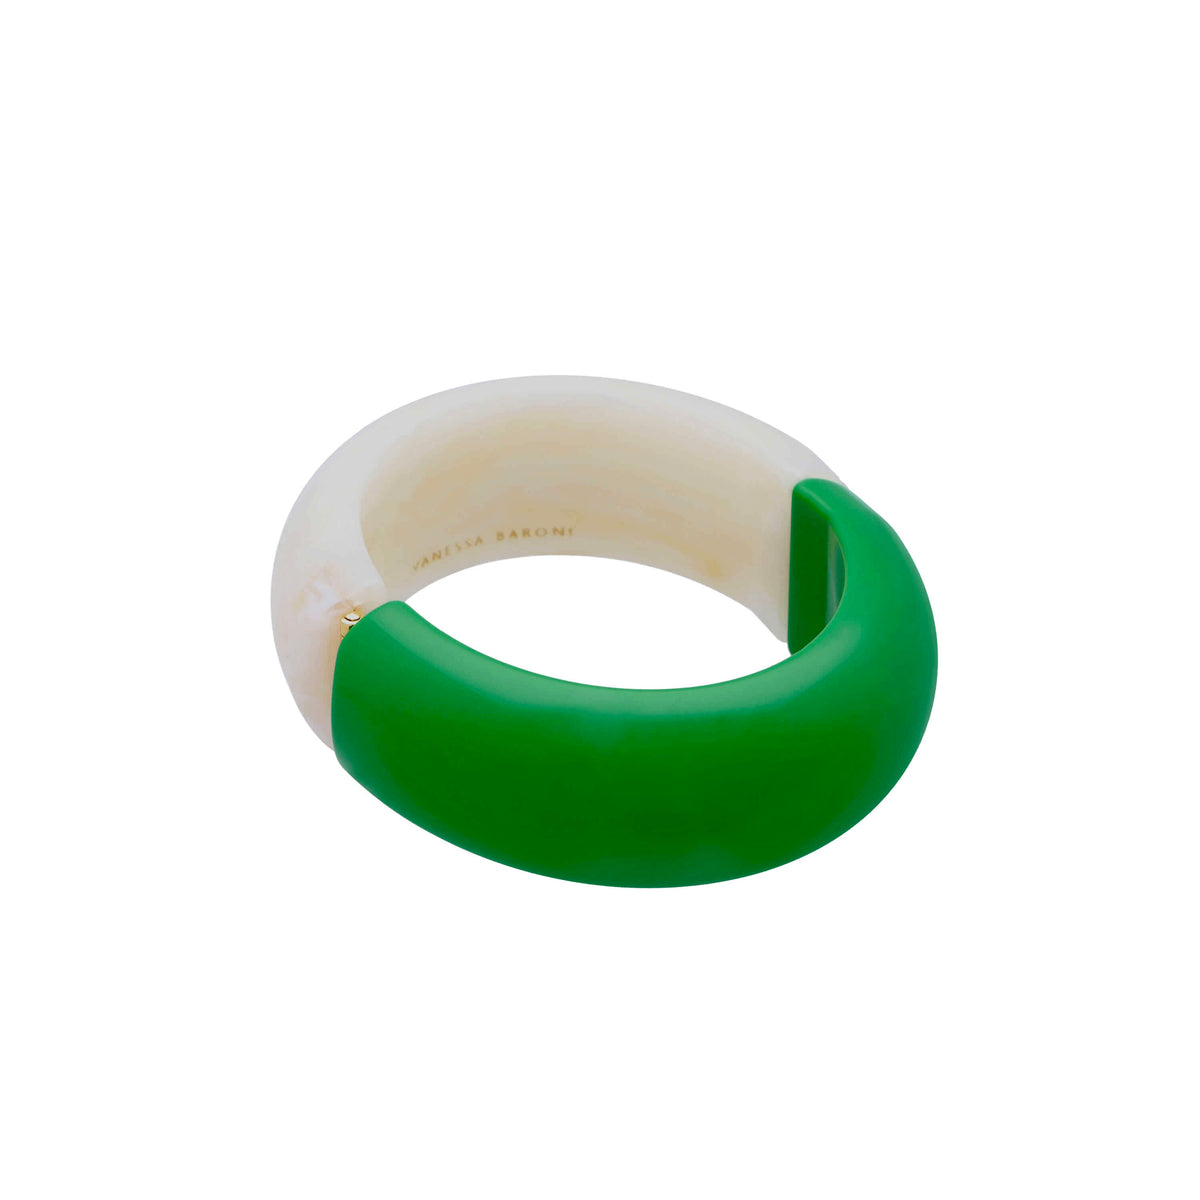 2 Color Bangle - Green Pearl Marble